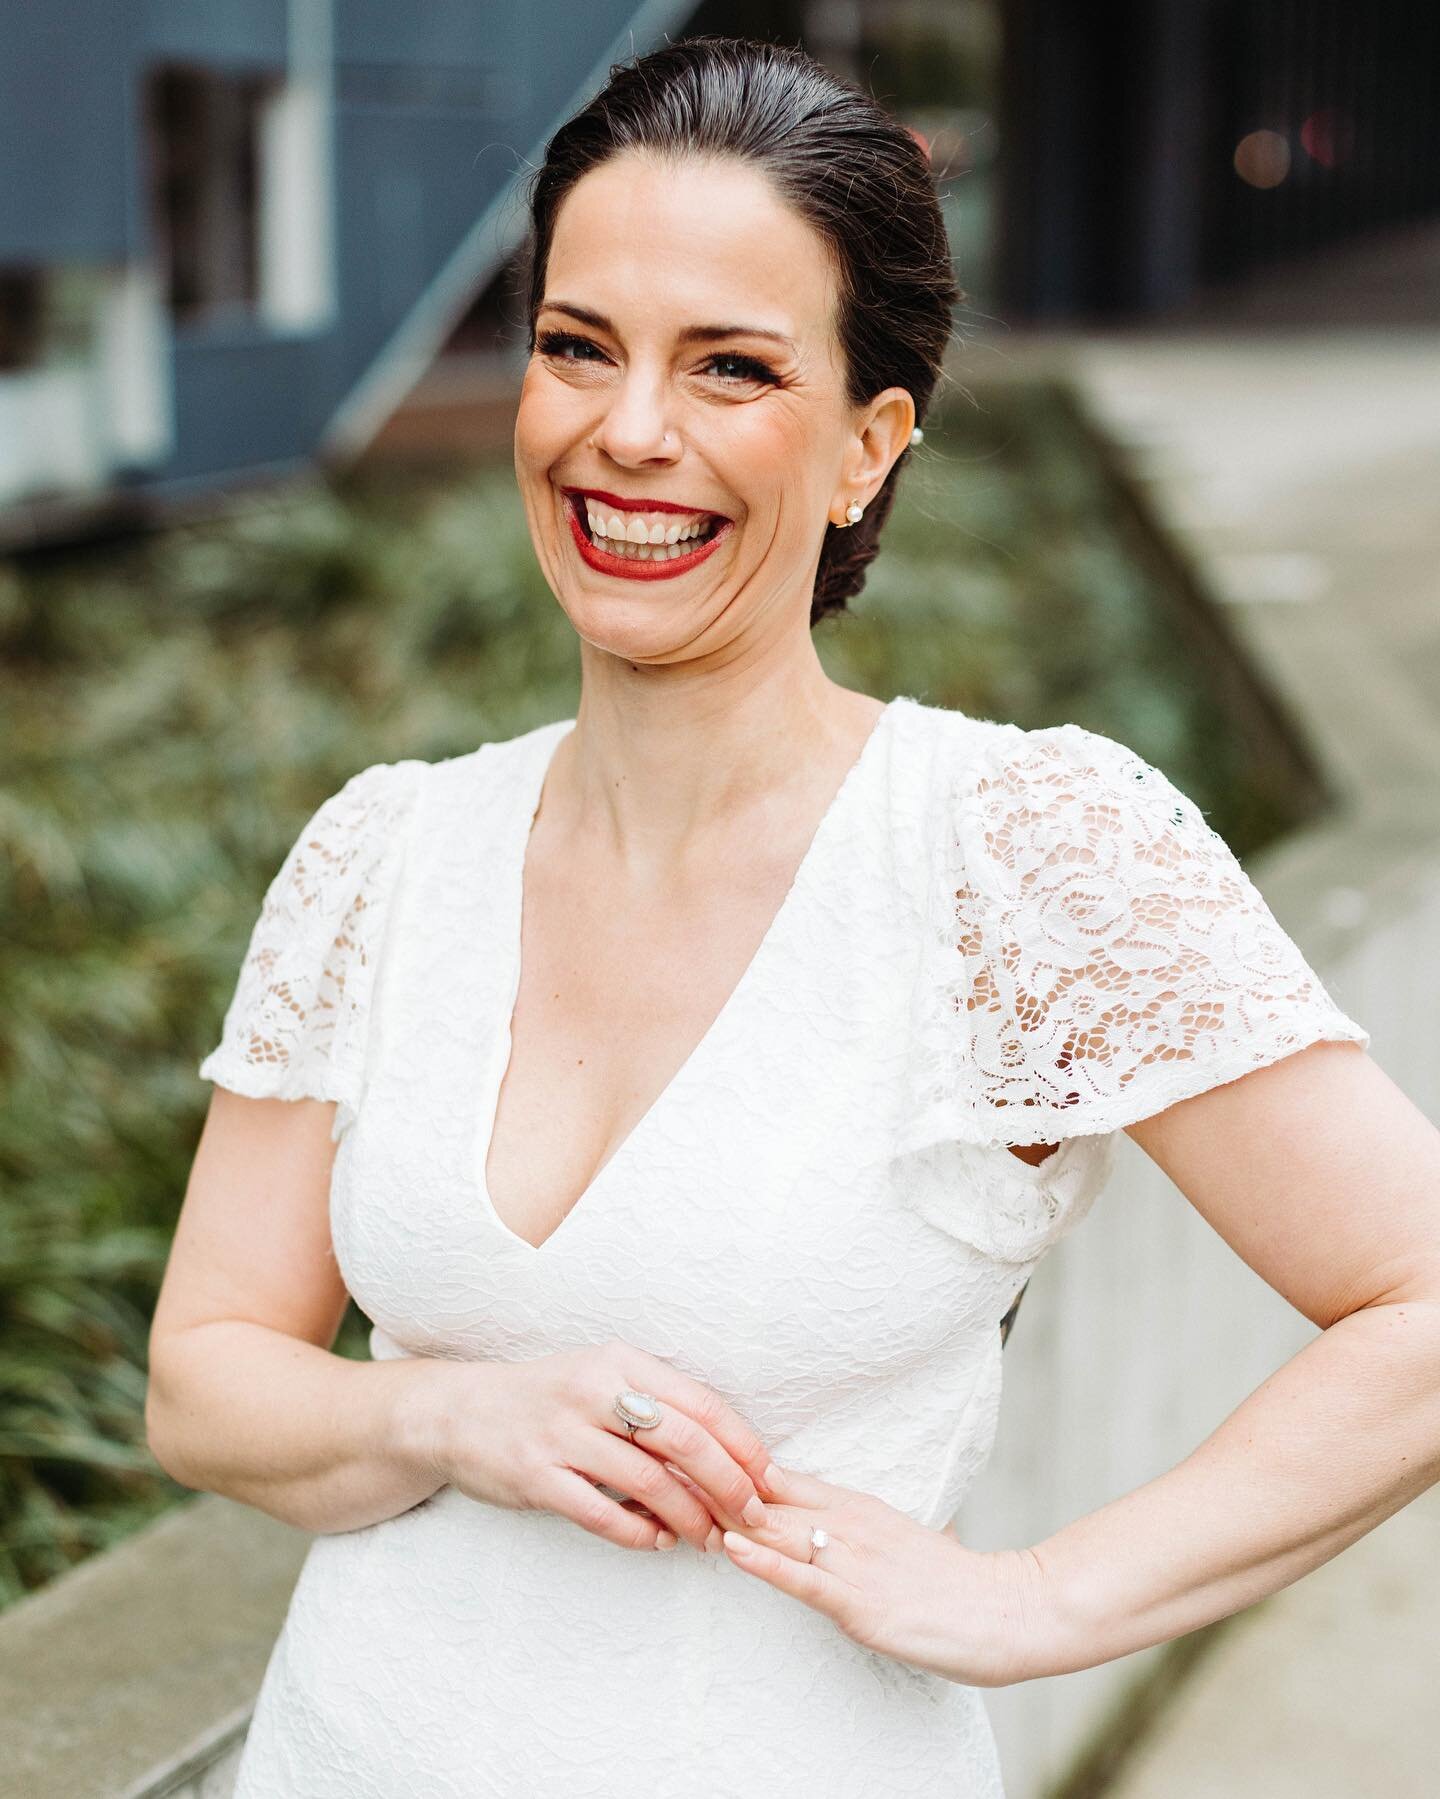 This smile says it all! We loved this sleek updo and classic red lip ❤️ 
Photography: @jwkinnunen 
Planning: @pinkblossomevents 

#oregonbride #oregonbridemag #portlandwedding  #pdxwedding #pdxmakeupartist #pdxhairstylist #portlandhairstylist #oregon